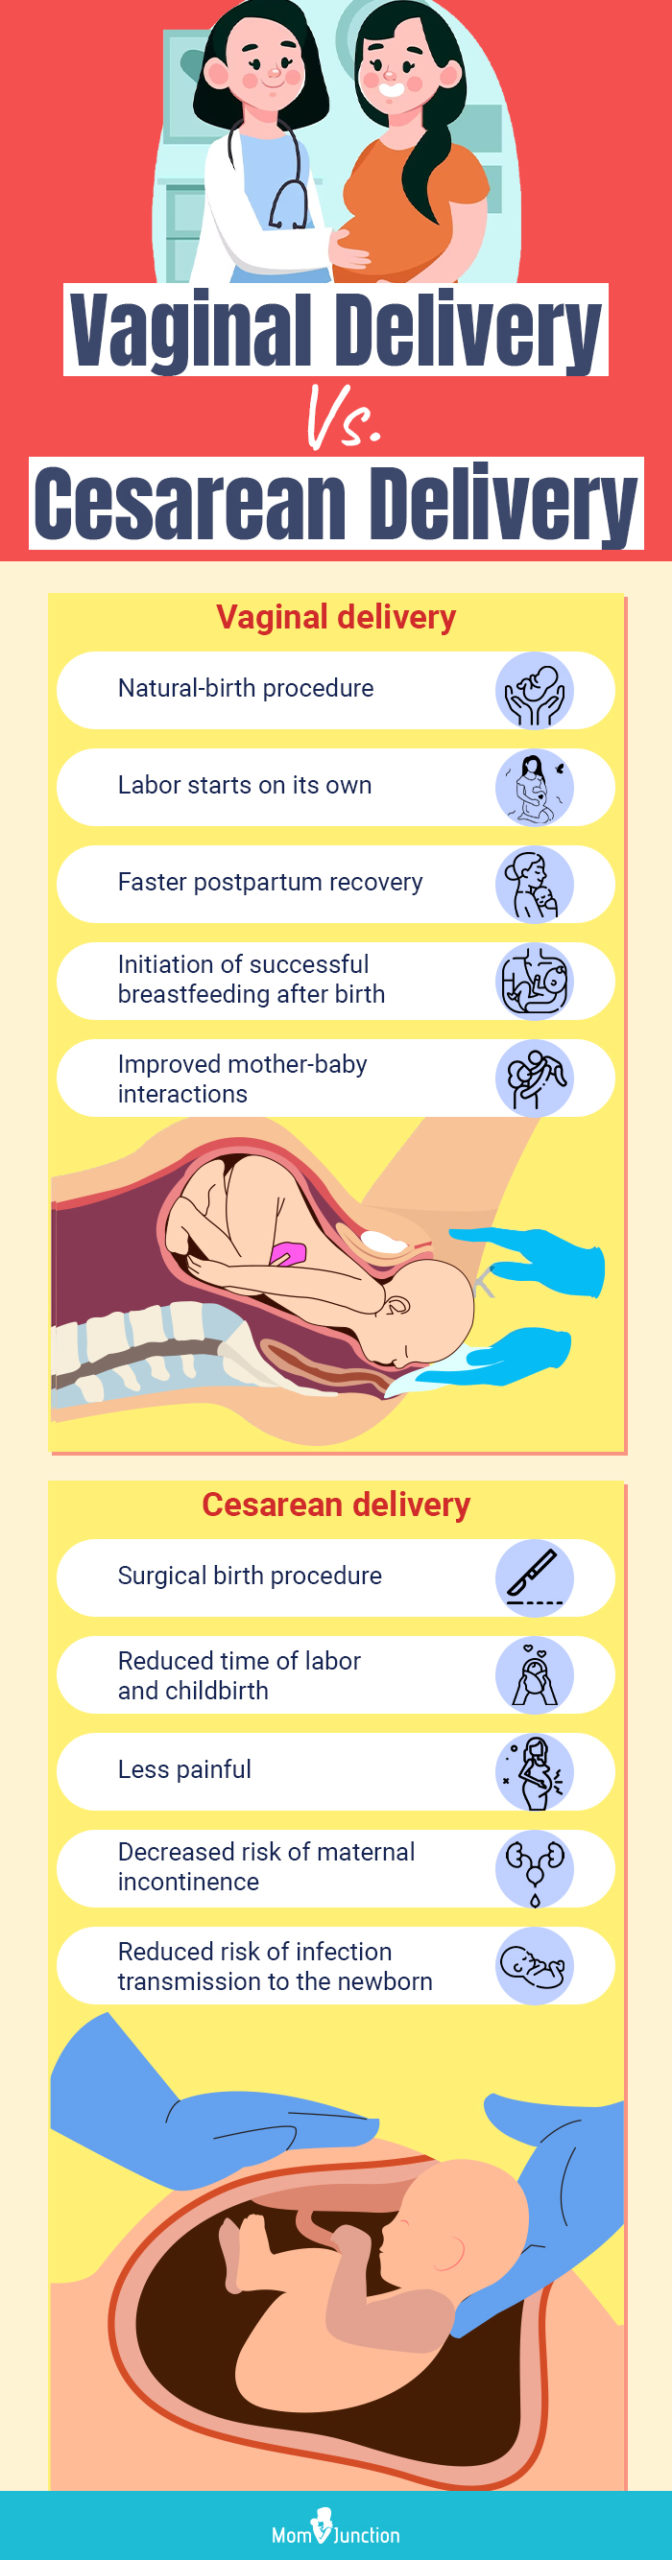 vaginal delivery Vs. cesarean delivery (infographic)